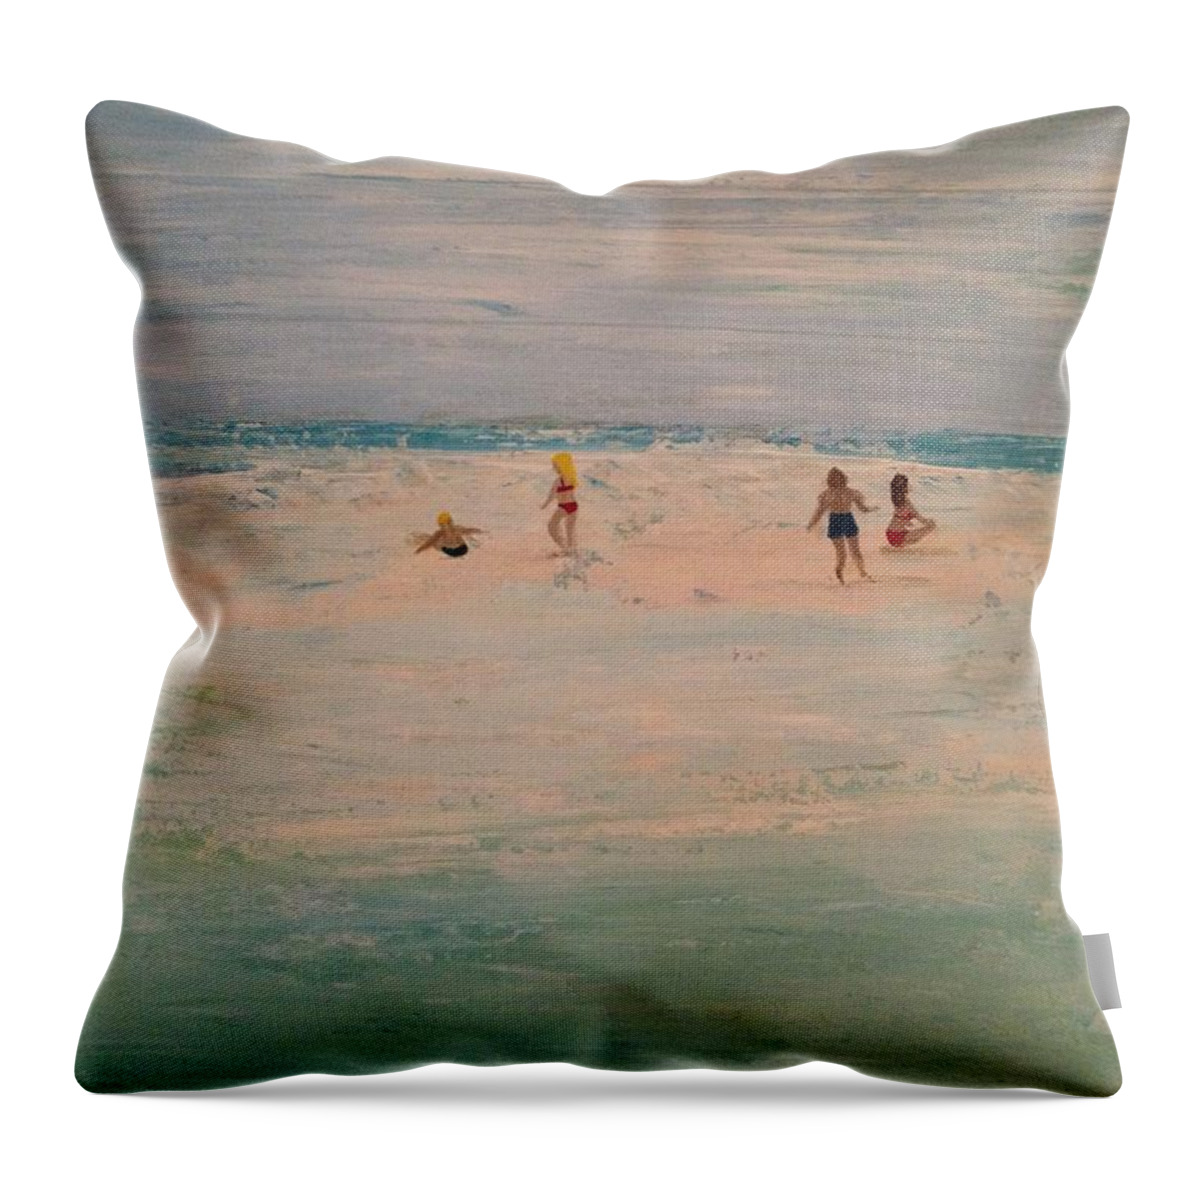  Throw Pillow featuring the painting The Sandbar by MiMi Stirn